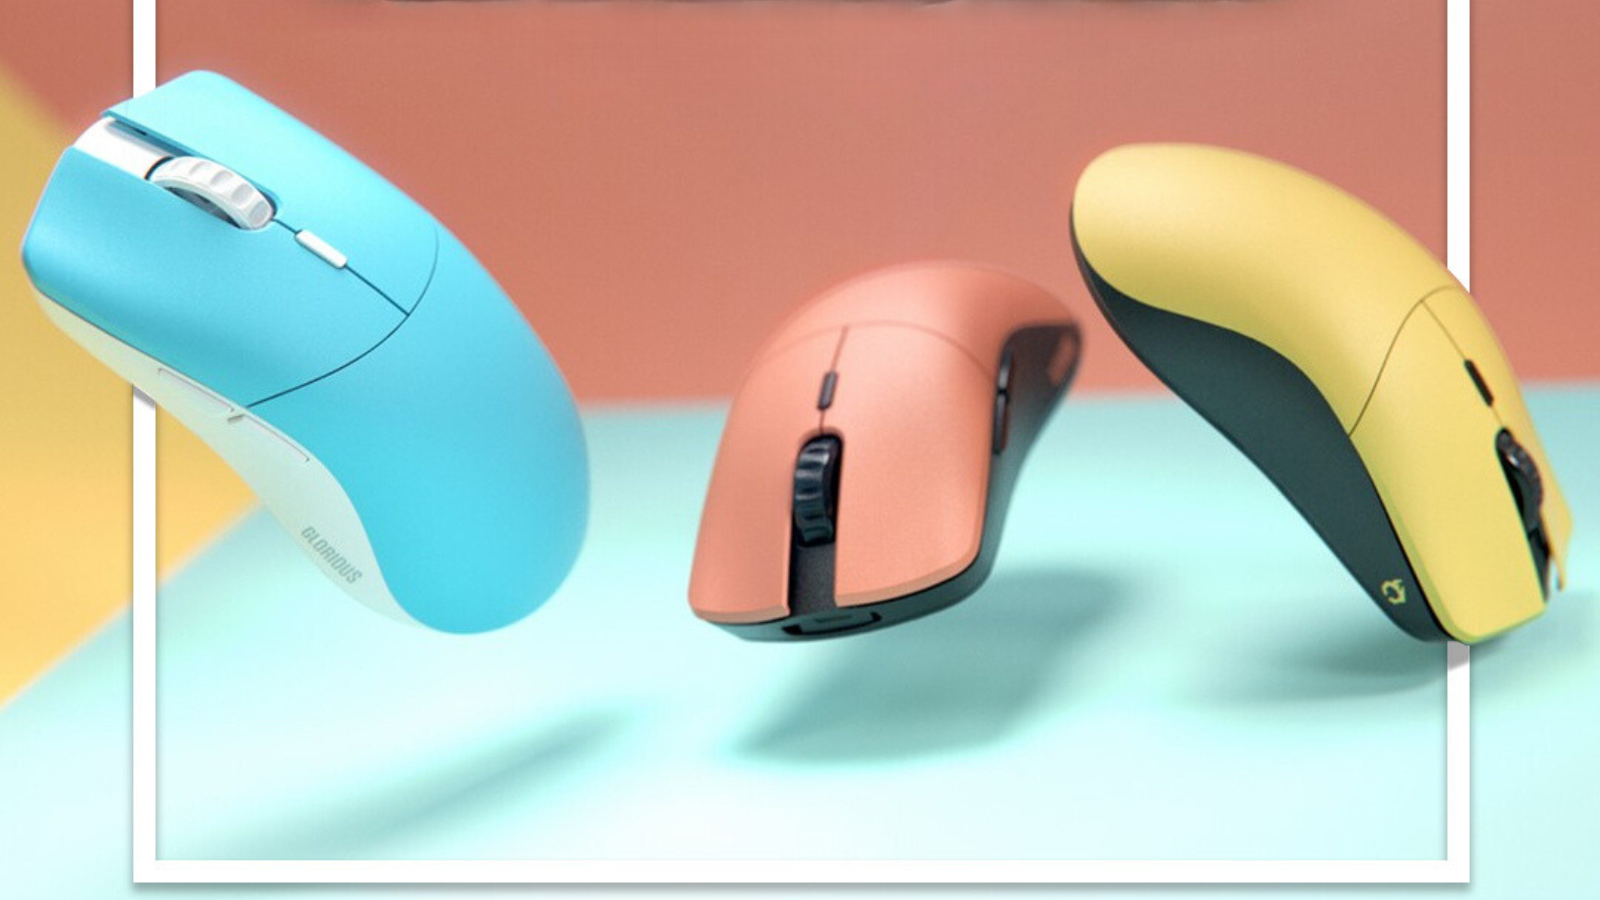 Add a Splash of Colour With These Colourful Gaming Peripherals